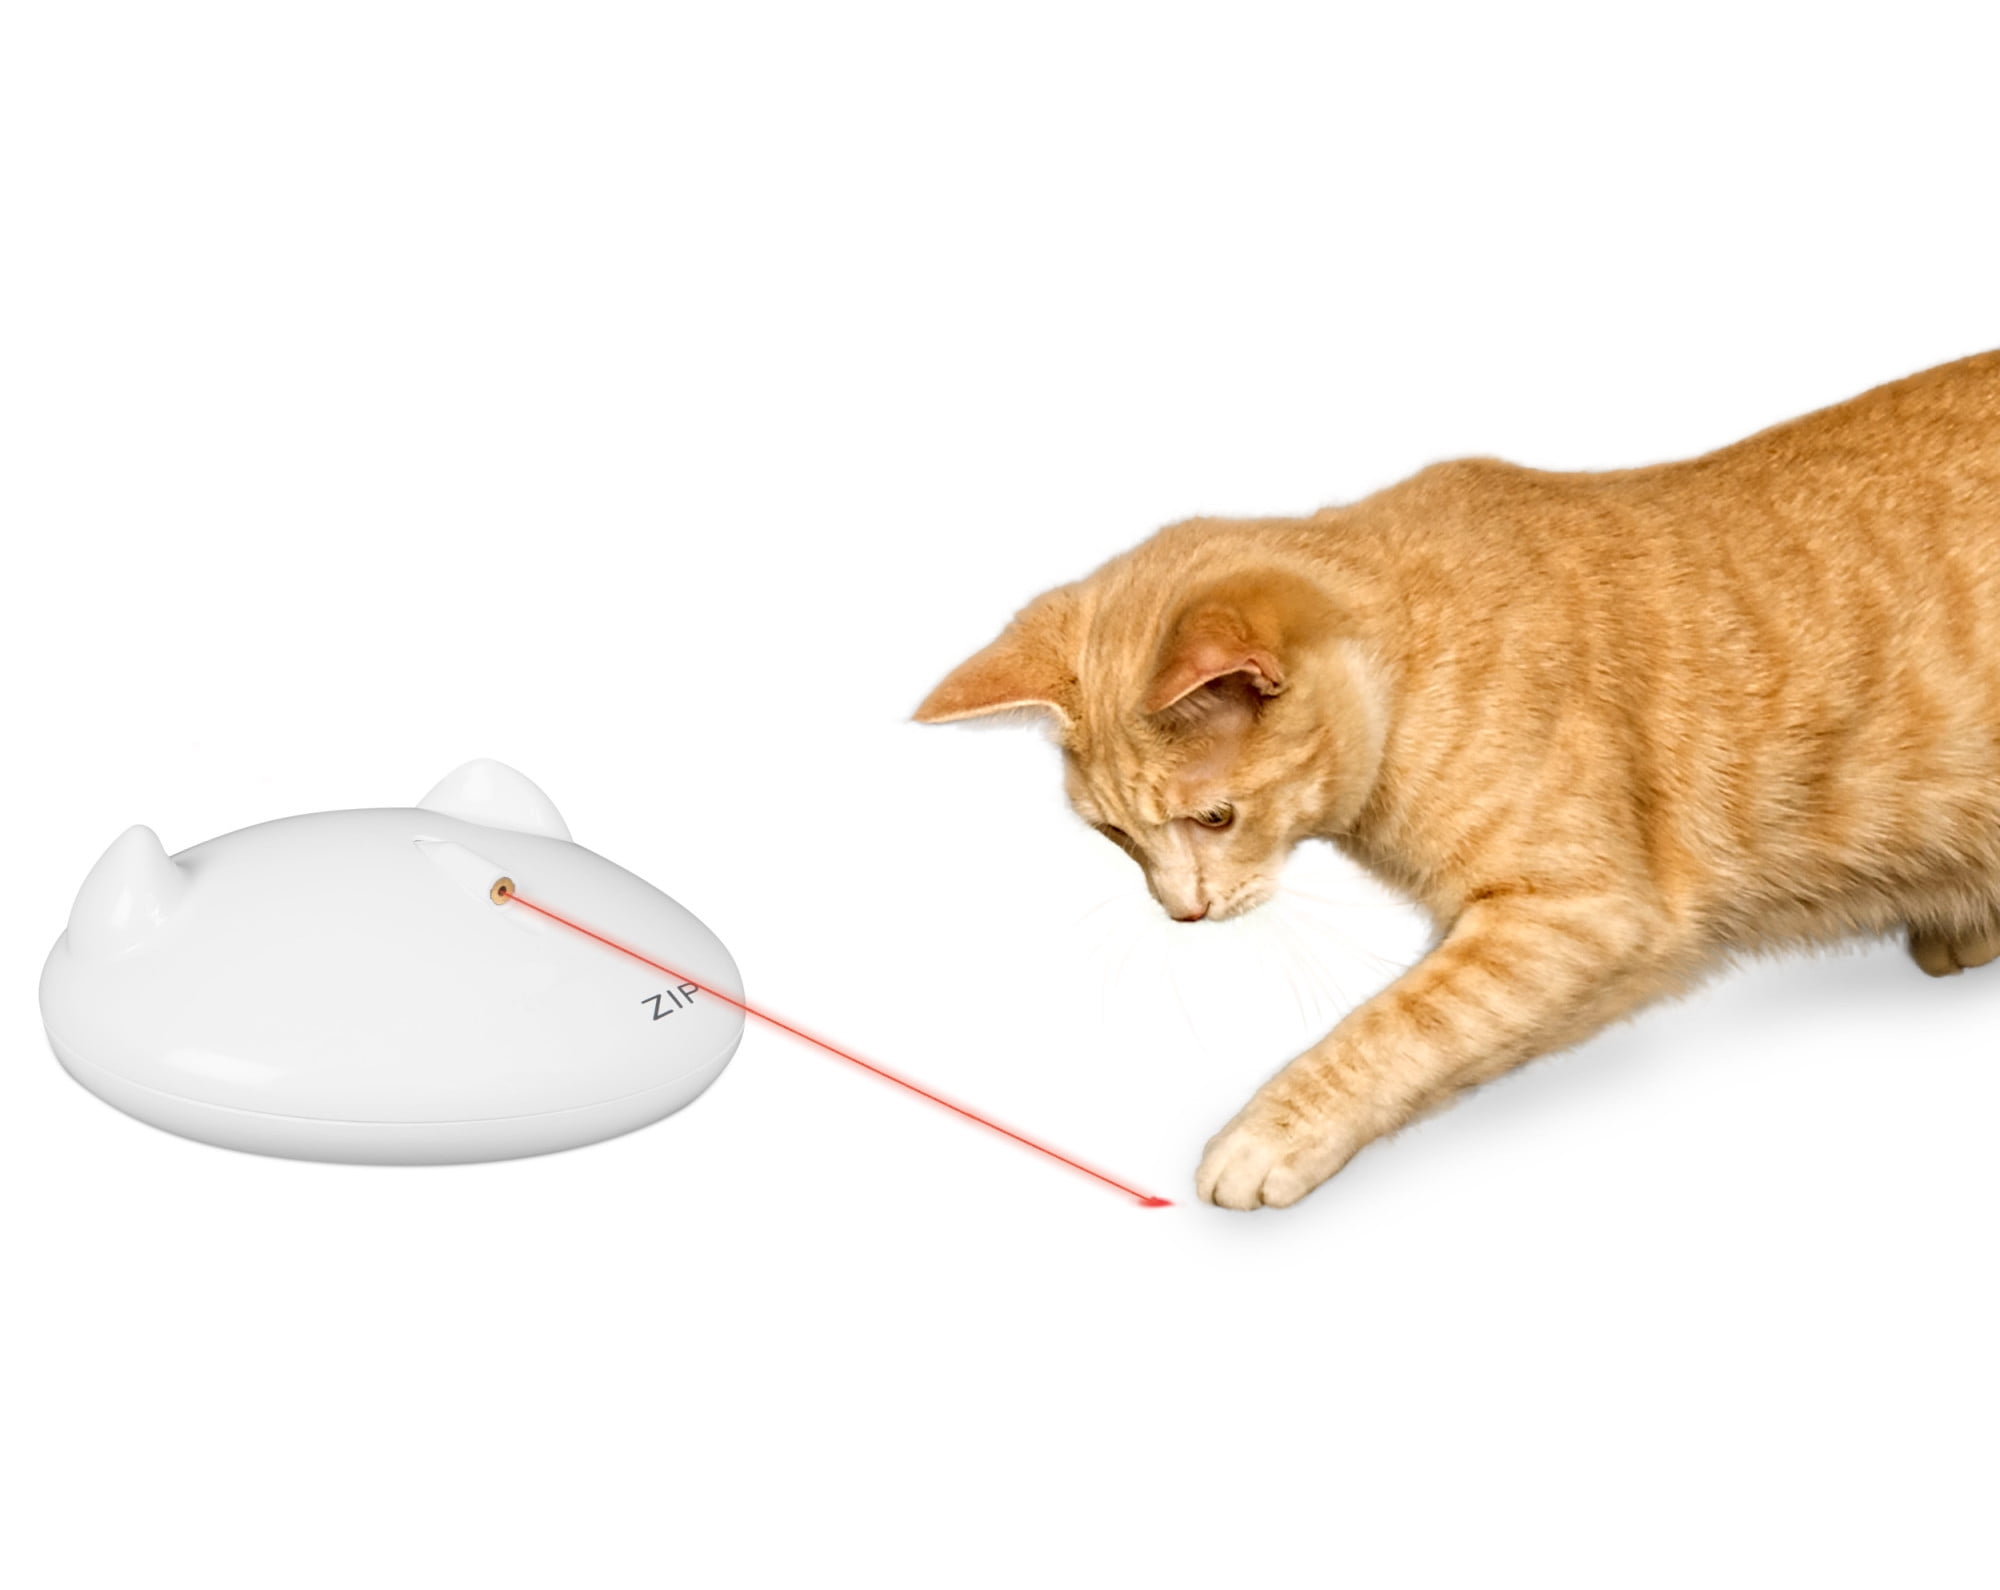 automatic string cat toy